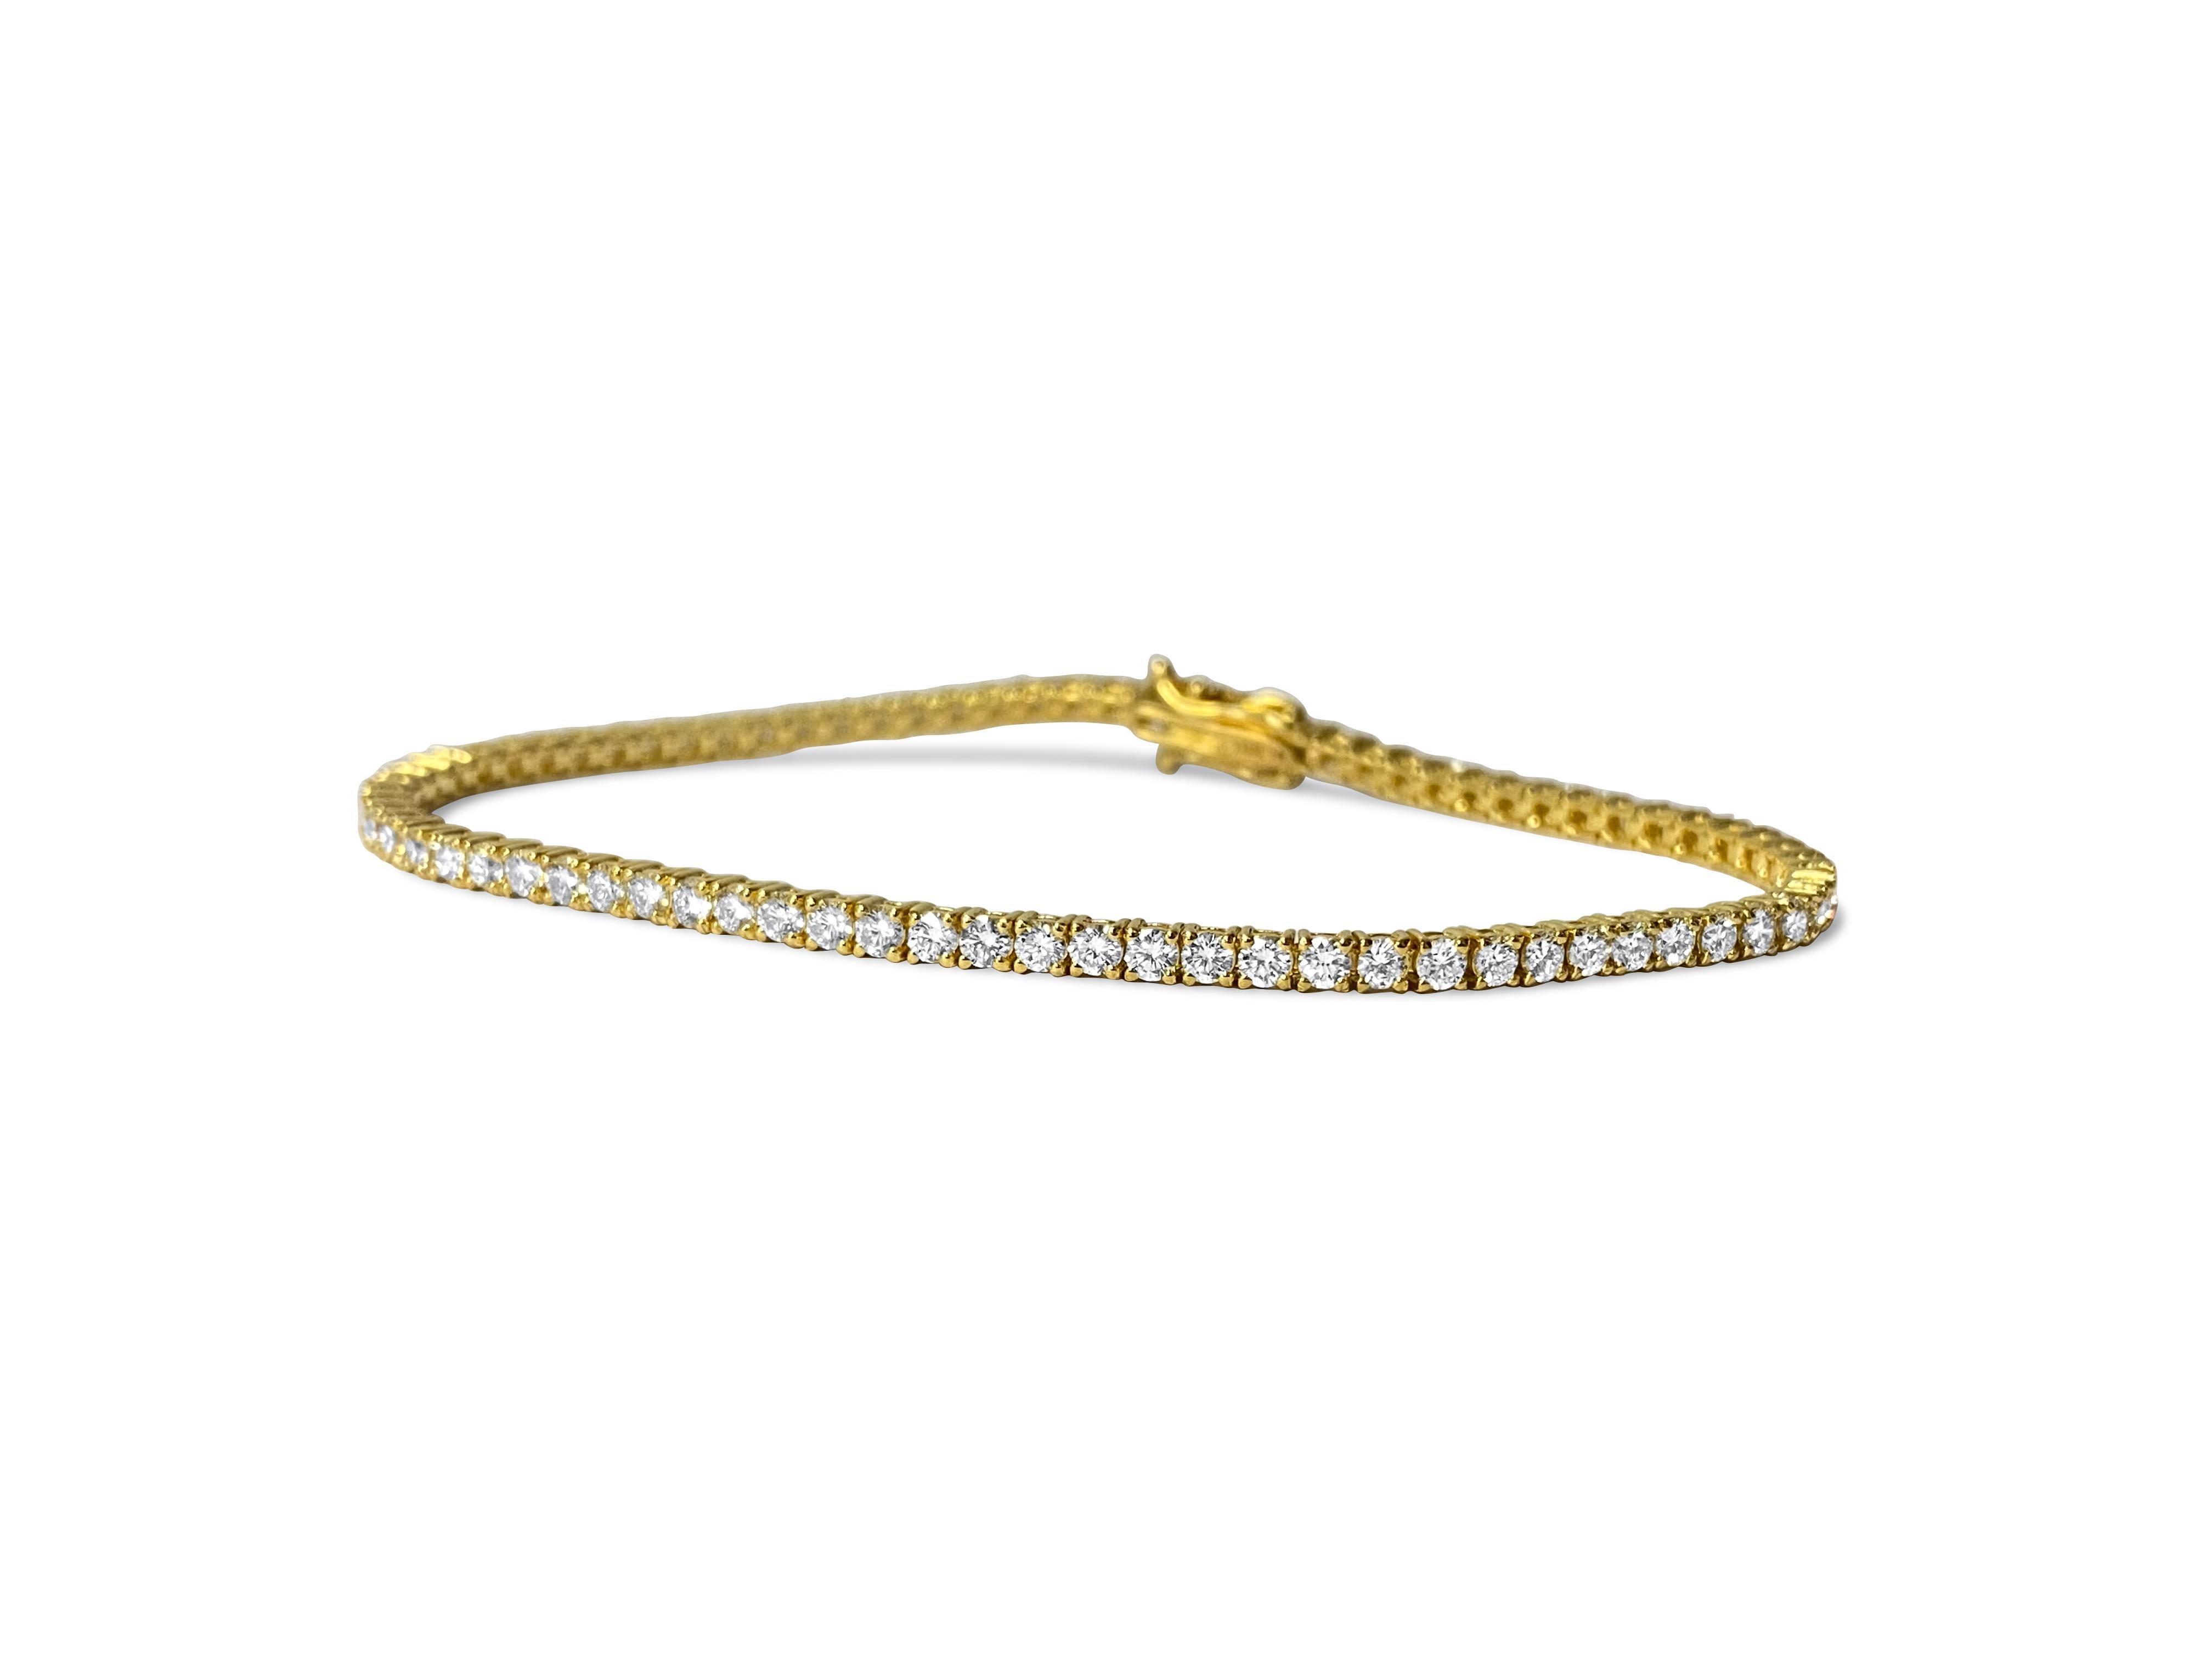 From luxurious 14k yellow gold, this exquisite unisex diamond tennis bracelet boasts a total of 4.00 carats of dazzling round brilliant cut diamonds. Each diamond showcases VVS-VS clarity and H color, ensuring exceptional brilliance and sparkle. Set